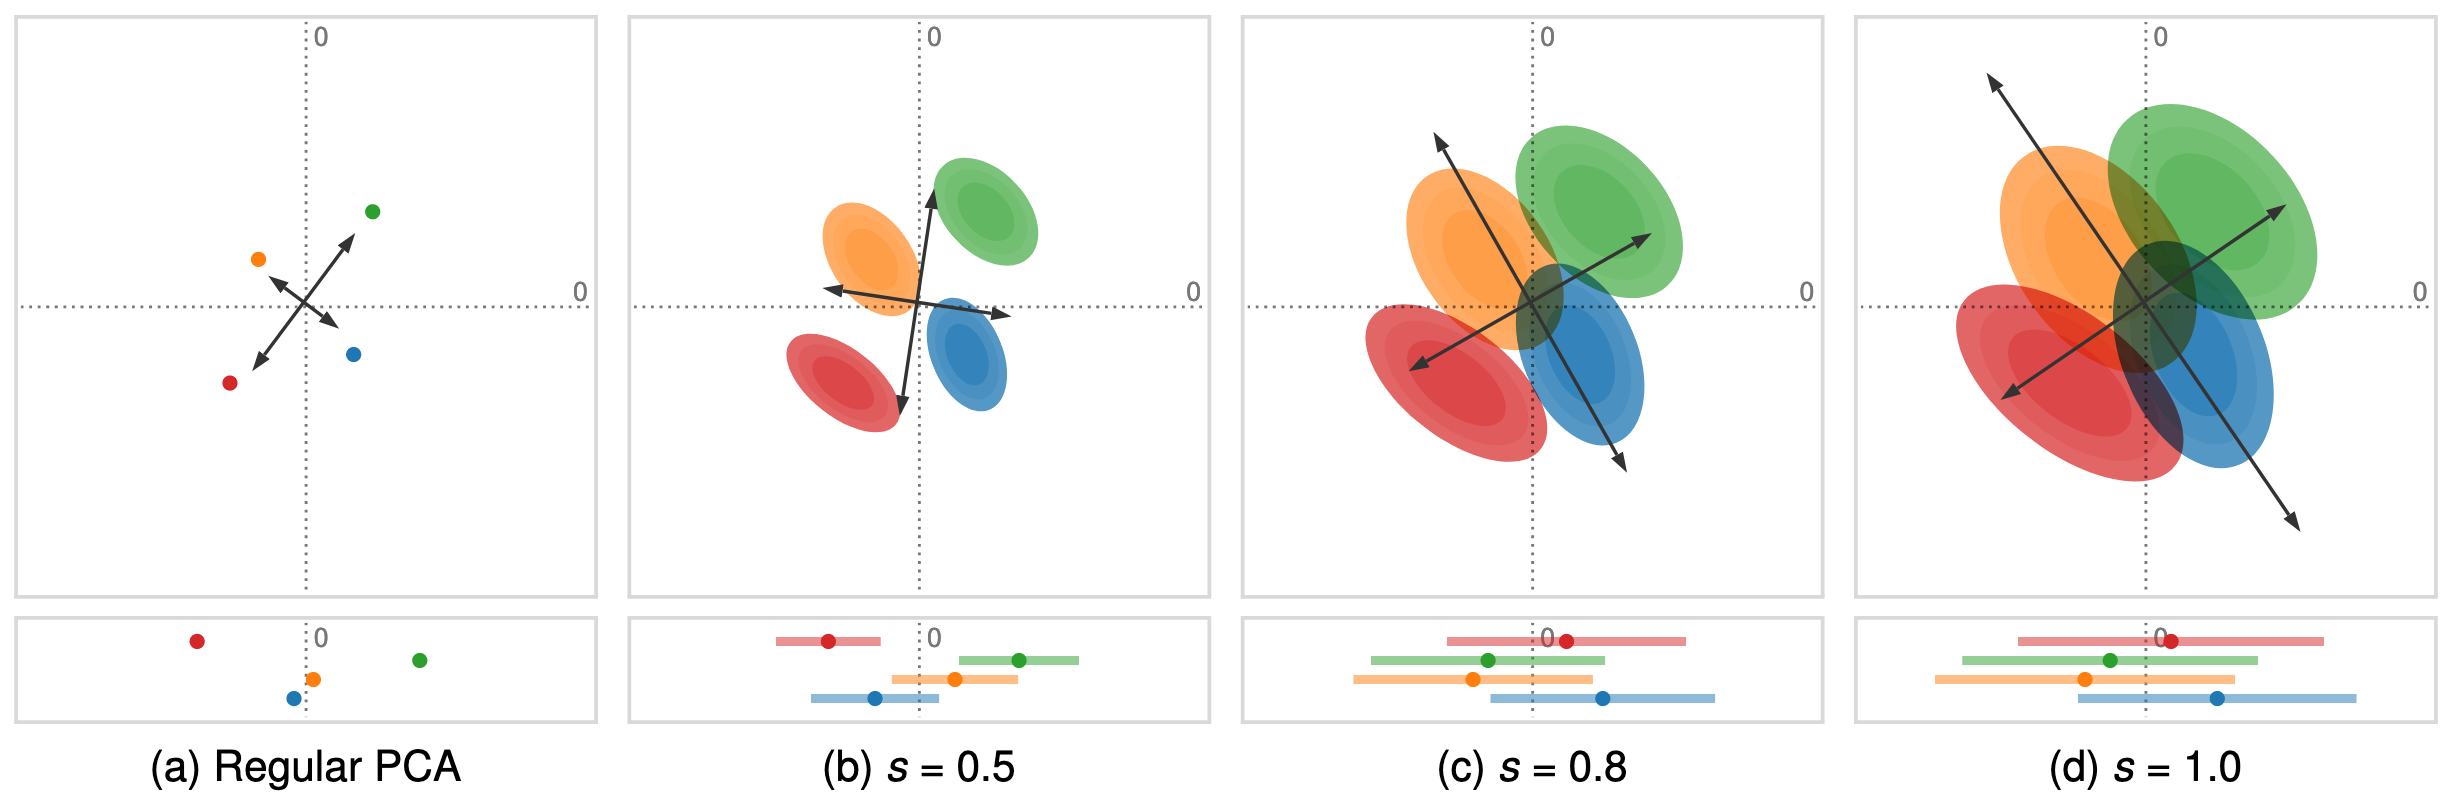 Teaser of Uncertainty-Aware Principal Component Analysis